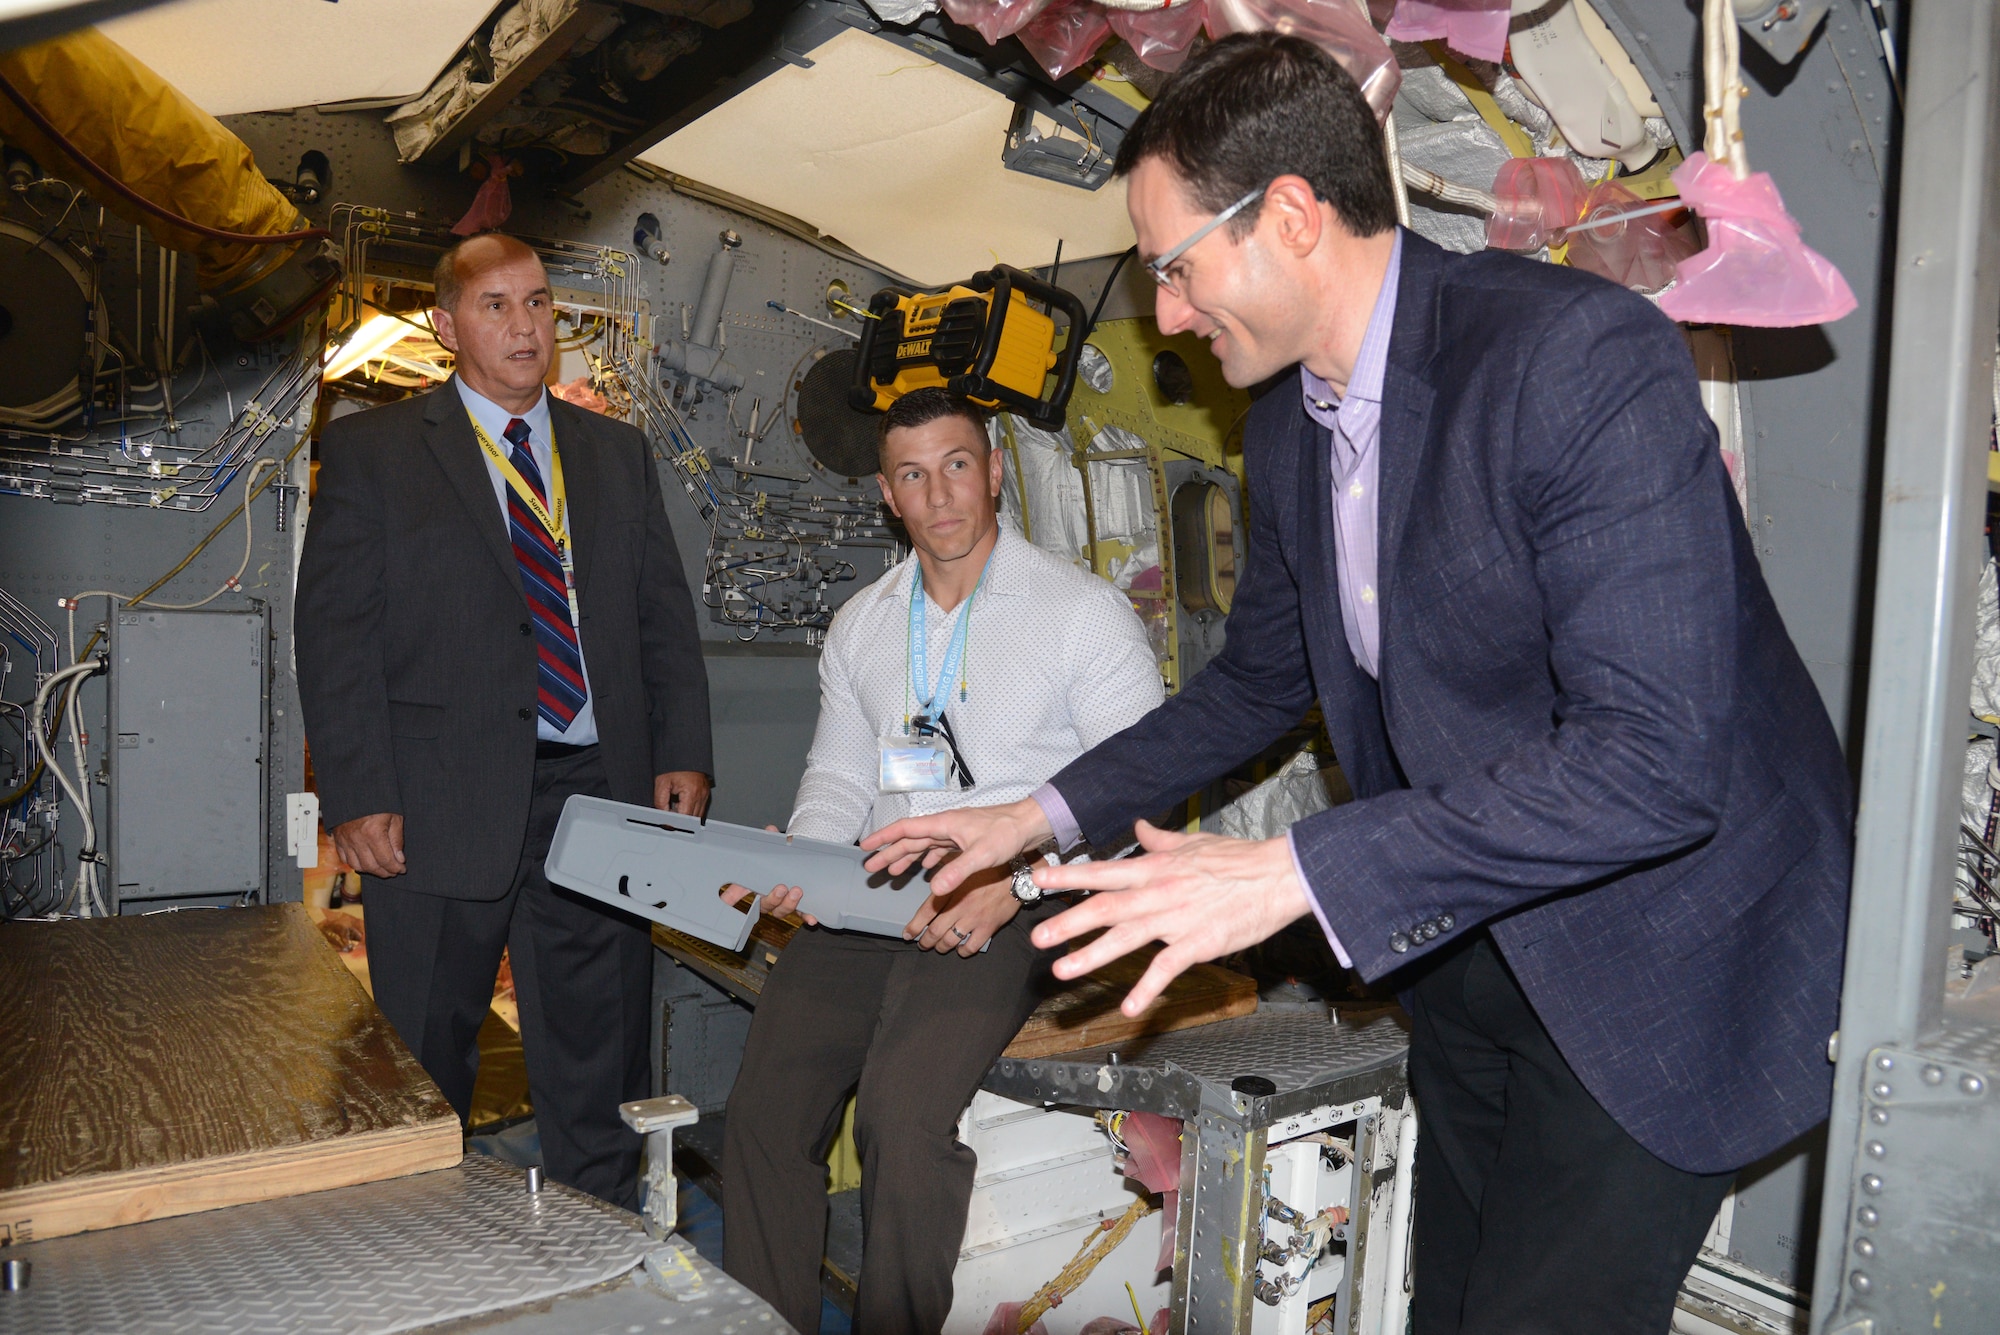 Assistant Secretary of the Air Force for Acquisition, Technology and Logistics Dr. Will Roper visited Tinker Air Force Base Sept. 13 to gain a better understanding of the Air Force Sustainment Center mission as the supporting command for readiness in the Air Force.